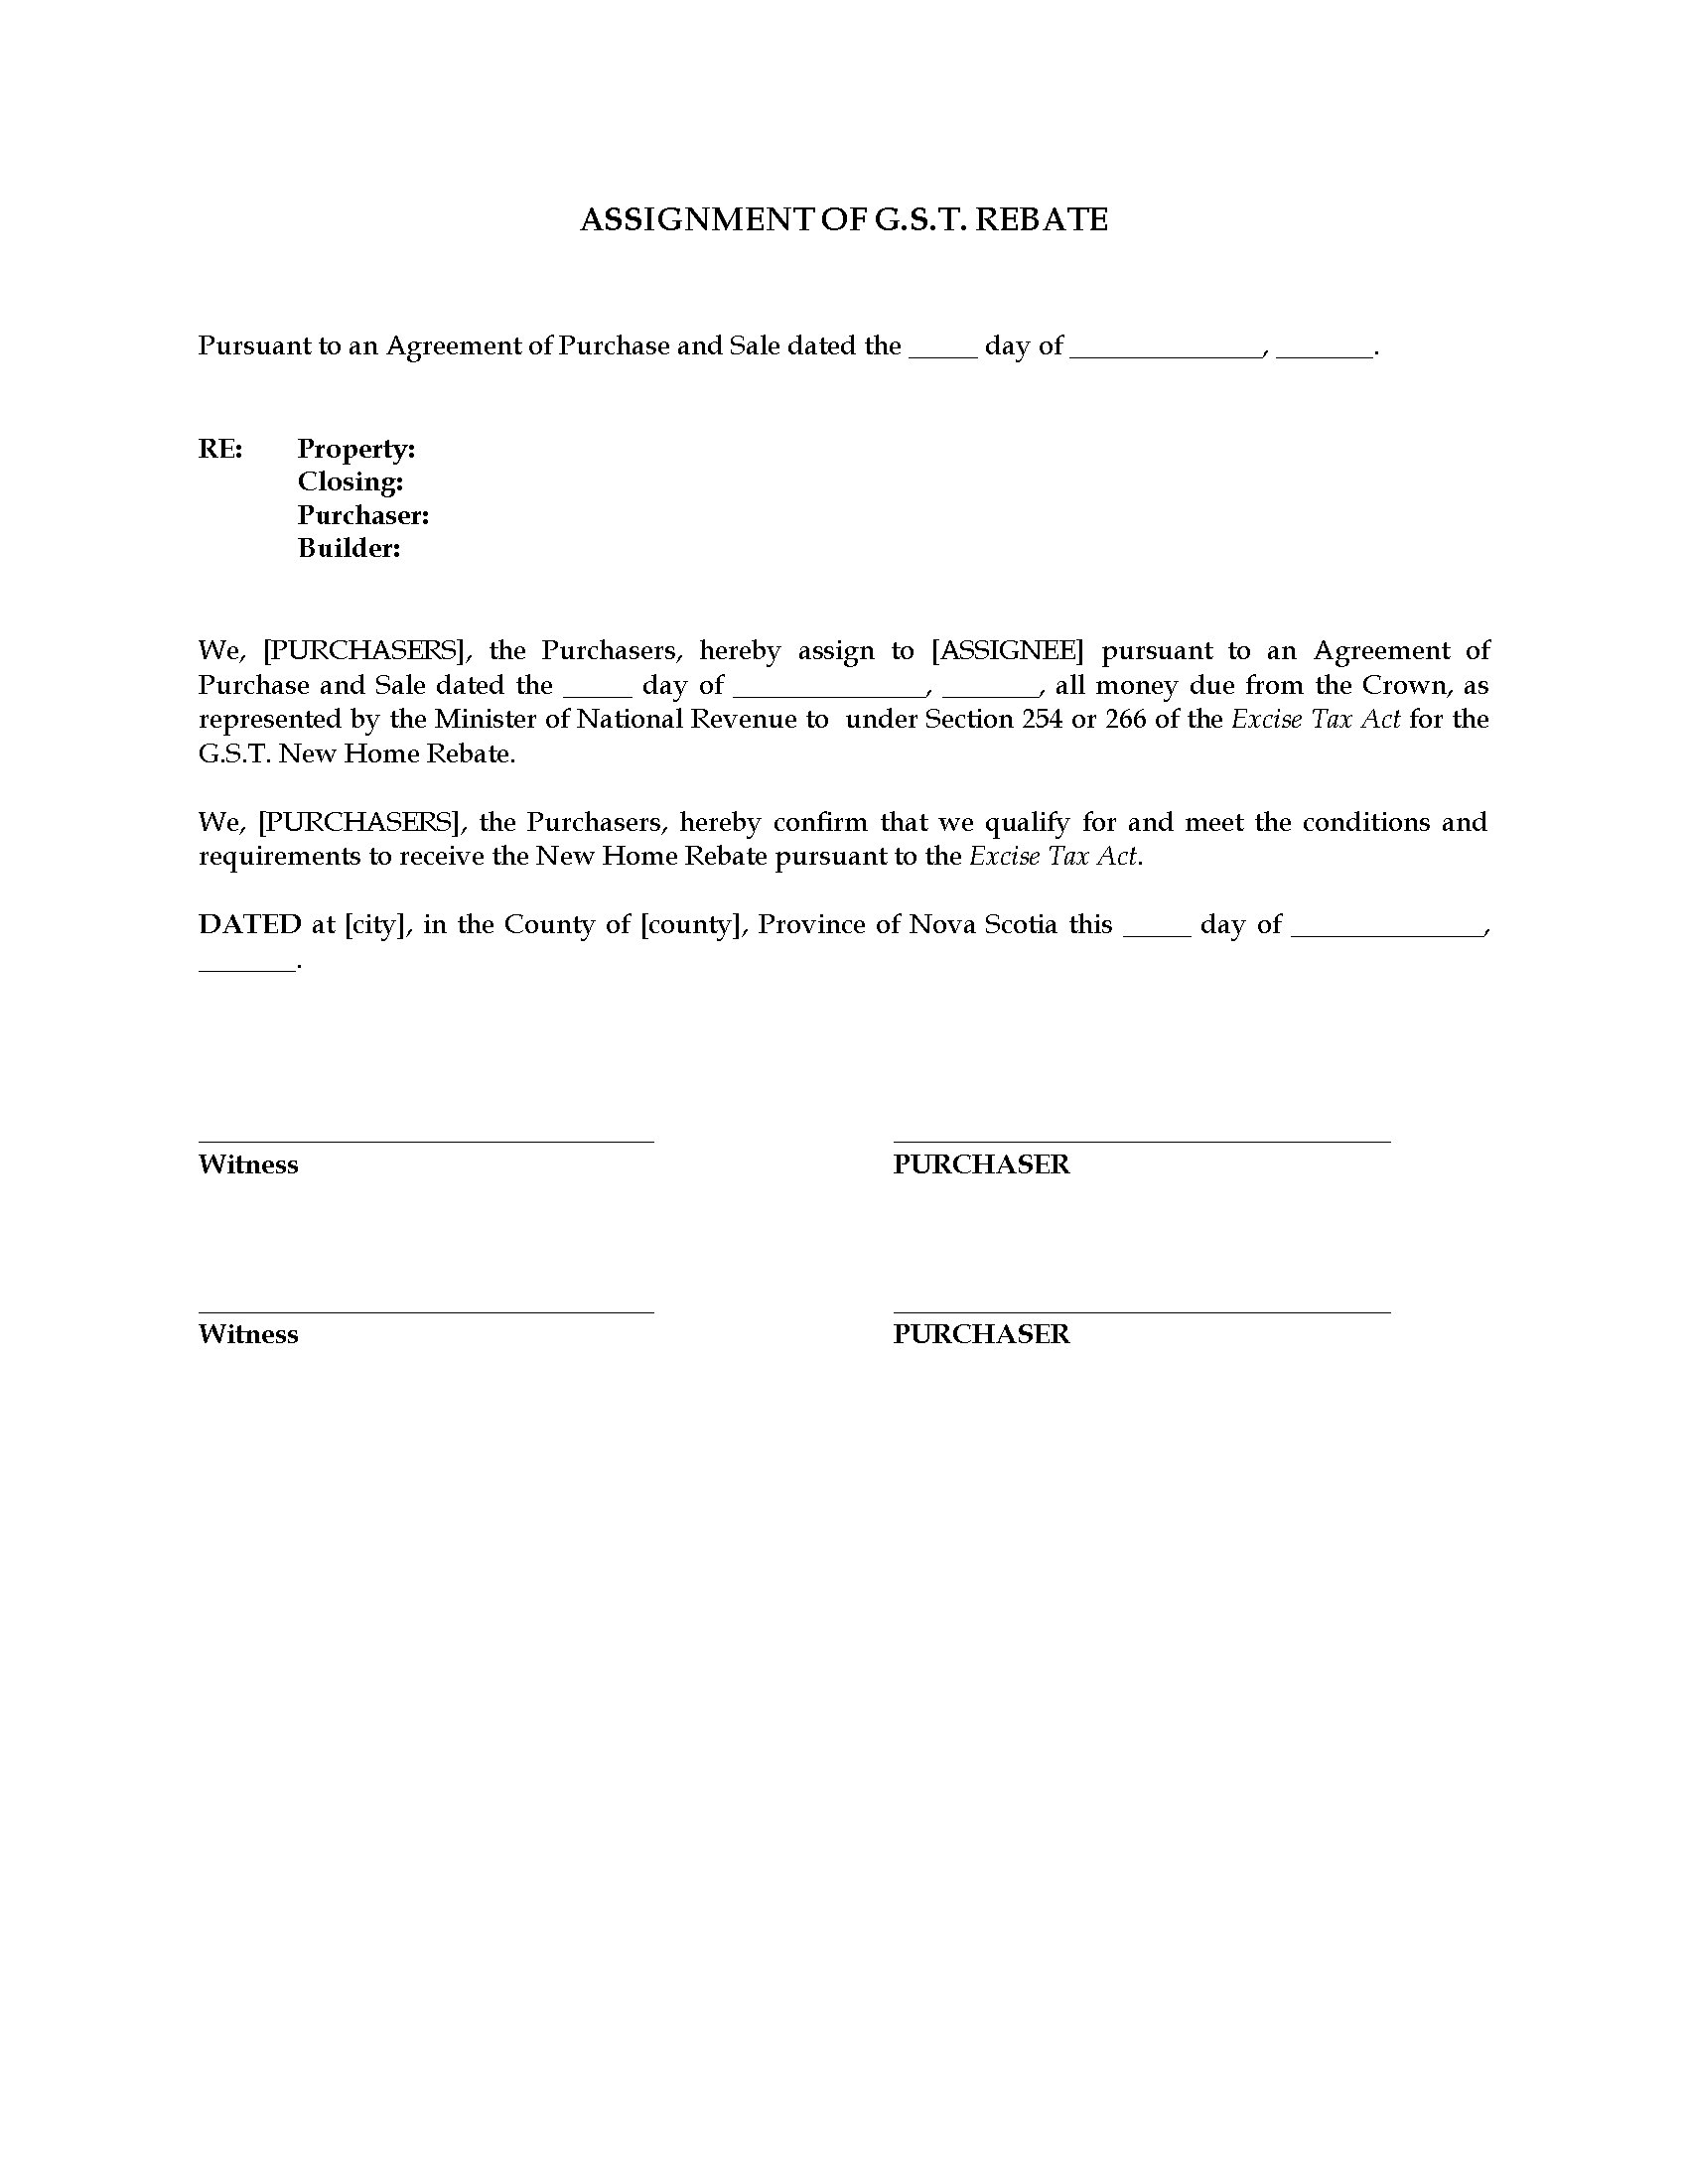 Canada Assignment of GST New Home Rebate | Legal Forms and Business Templates ...